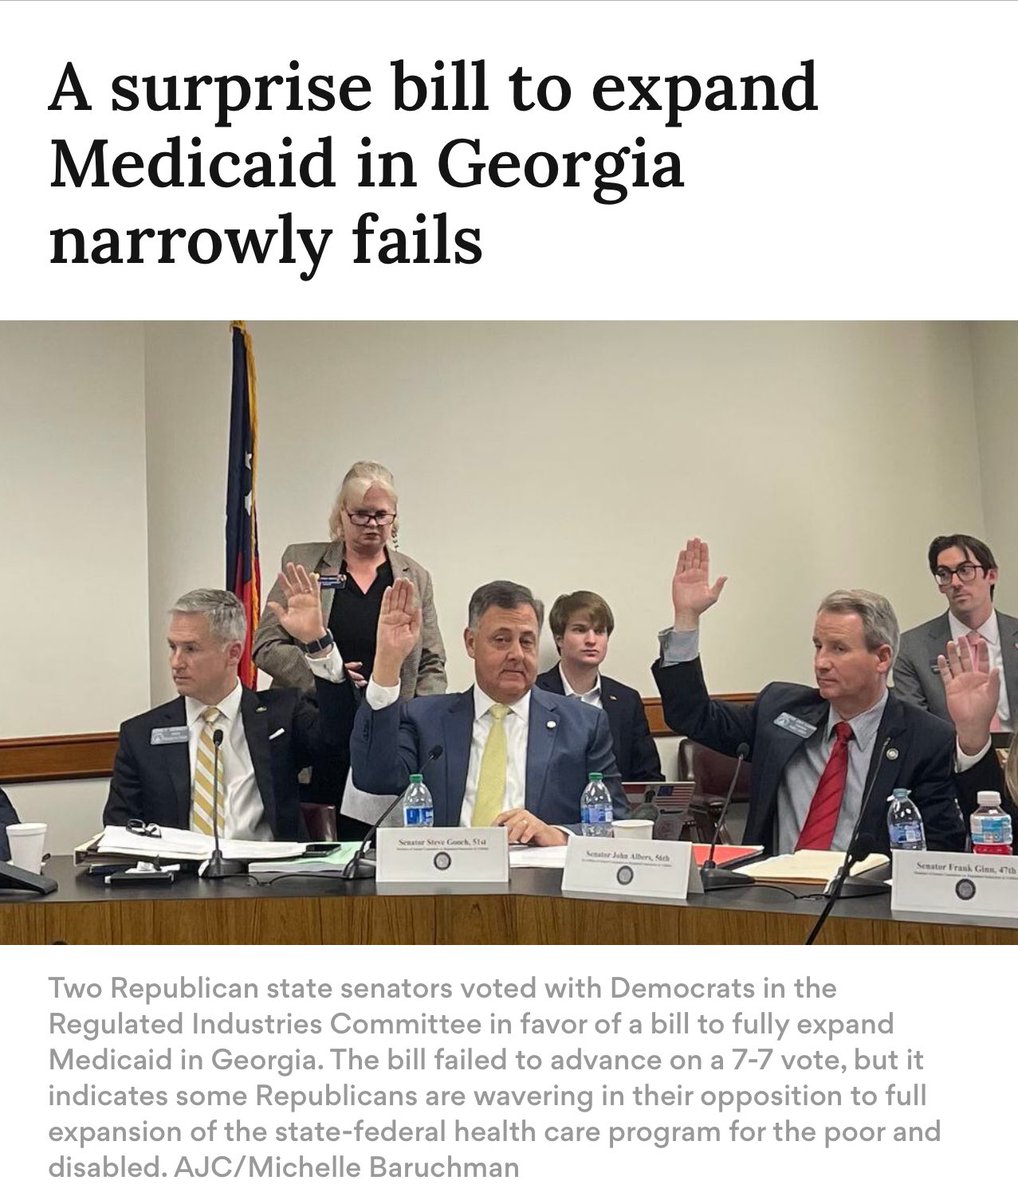 Democrats in Georgia have fought for Medicaid expansion for 14 years, and will keep at it until our Republican friends get out of their own way. We could’ve helped hundreds of thousands of people and gotten billions in funding, but continued playing politics with people’s lives.